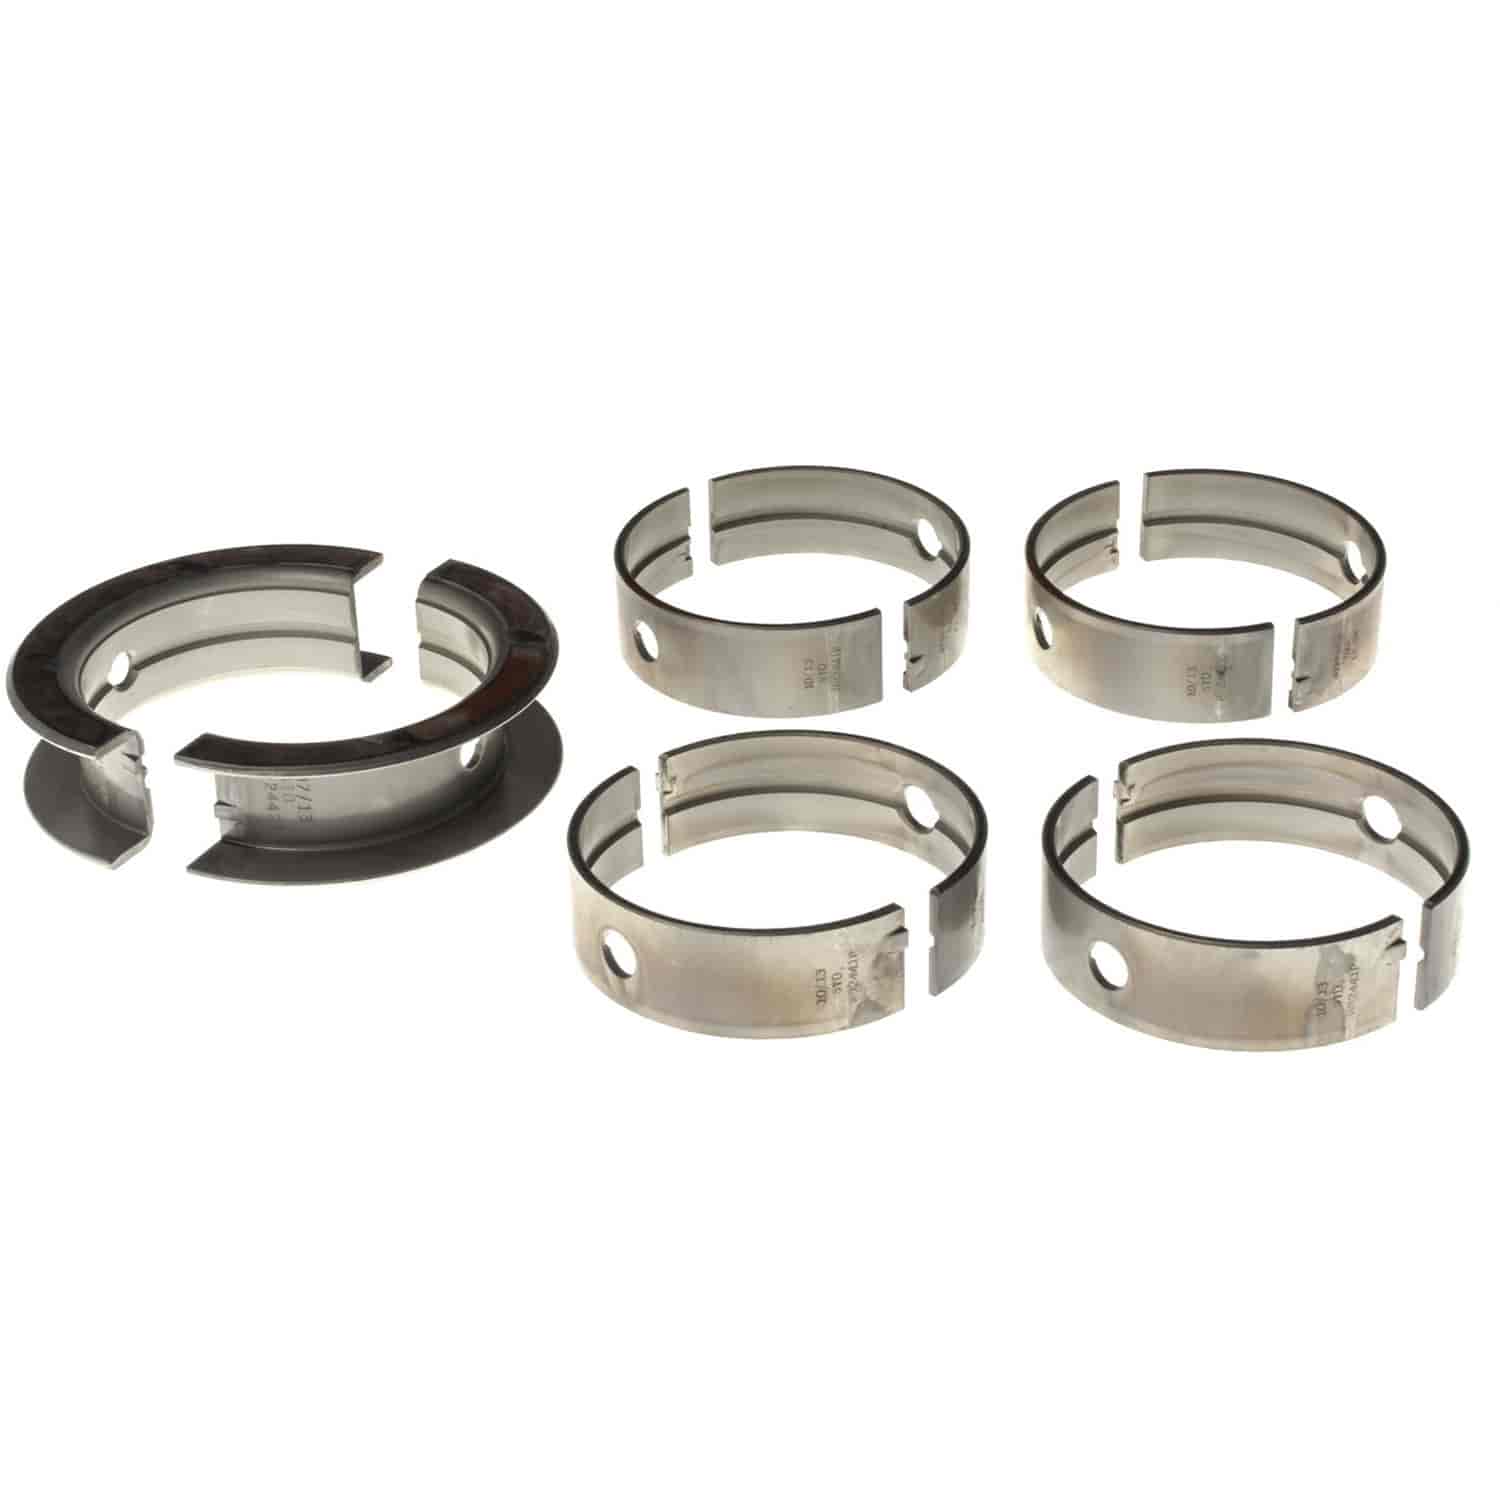 Main Bearing Set Ford 1964-1977 FE V8 352/360/390/410/427/428 (5.8/5.9/6.4/6.7/7.0L) with Standard Size